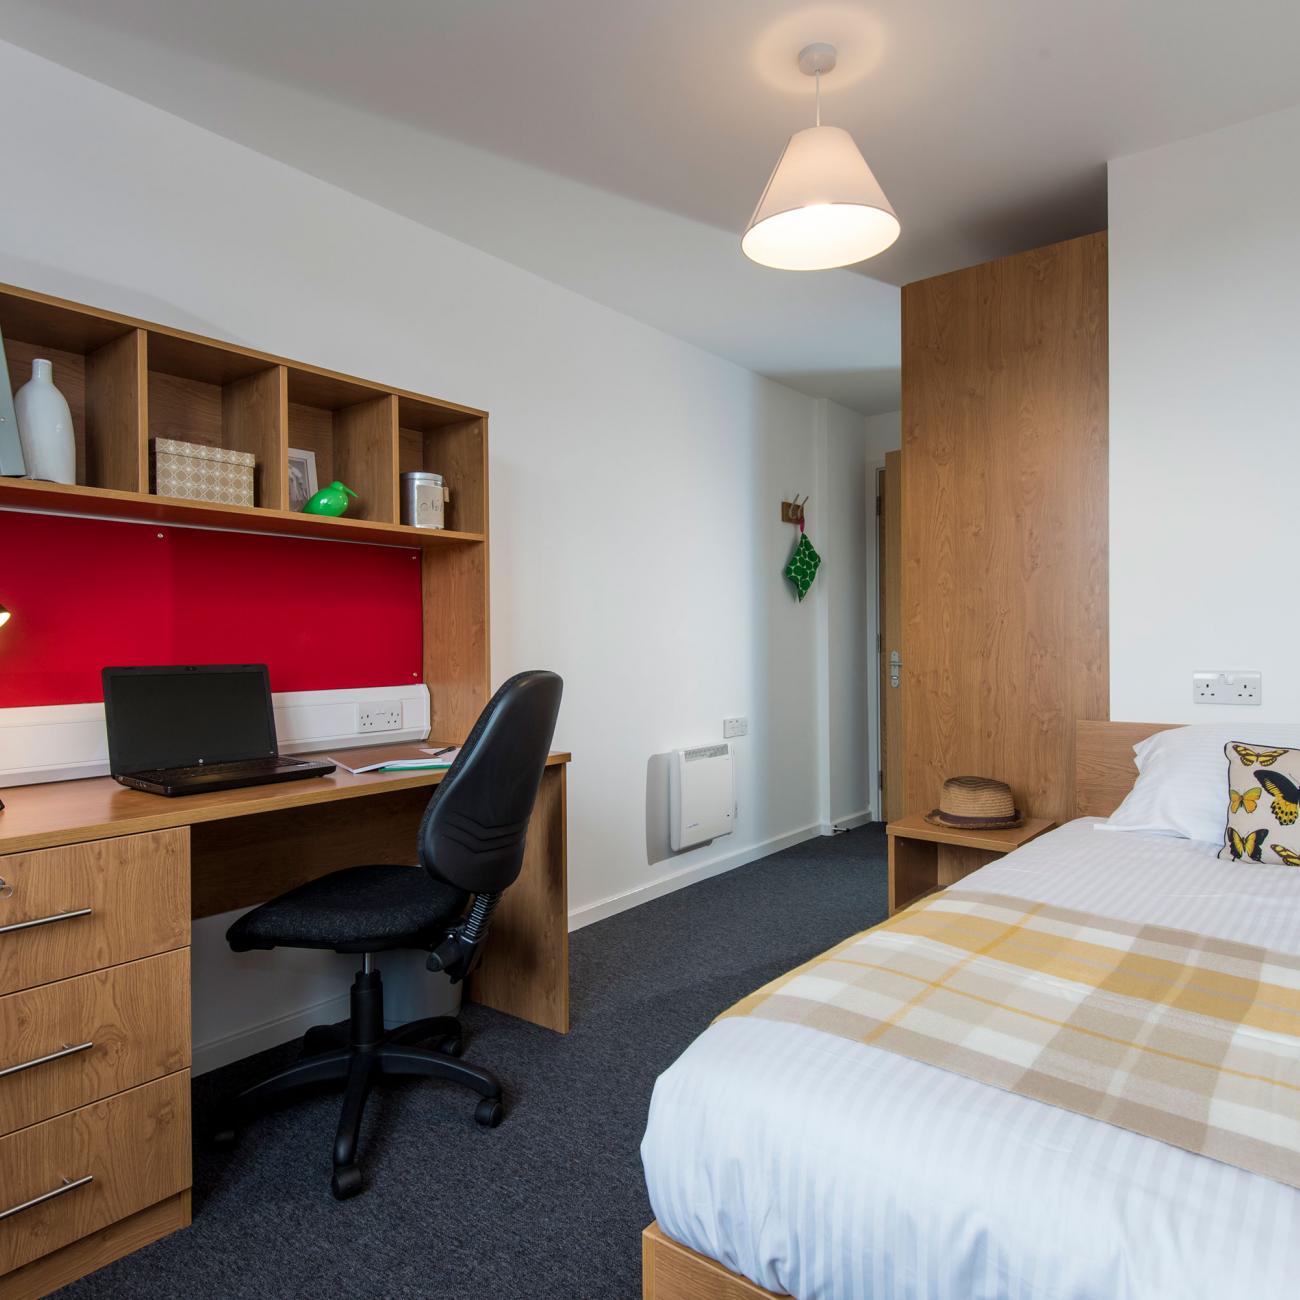 A modern student bedroom with white walls, wooden desk and neatly made double bed.